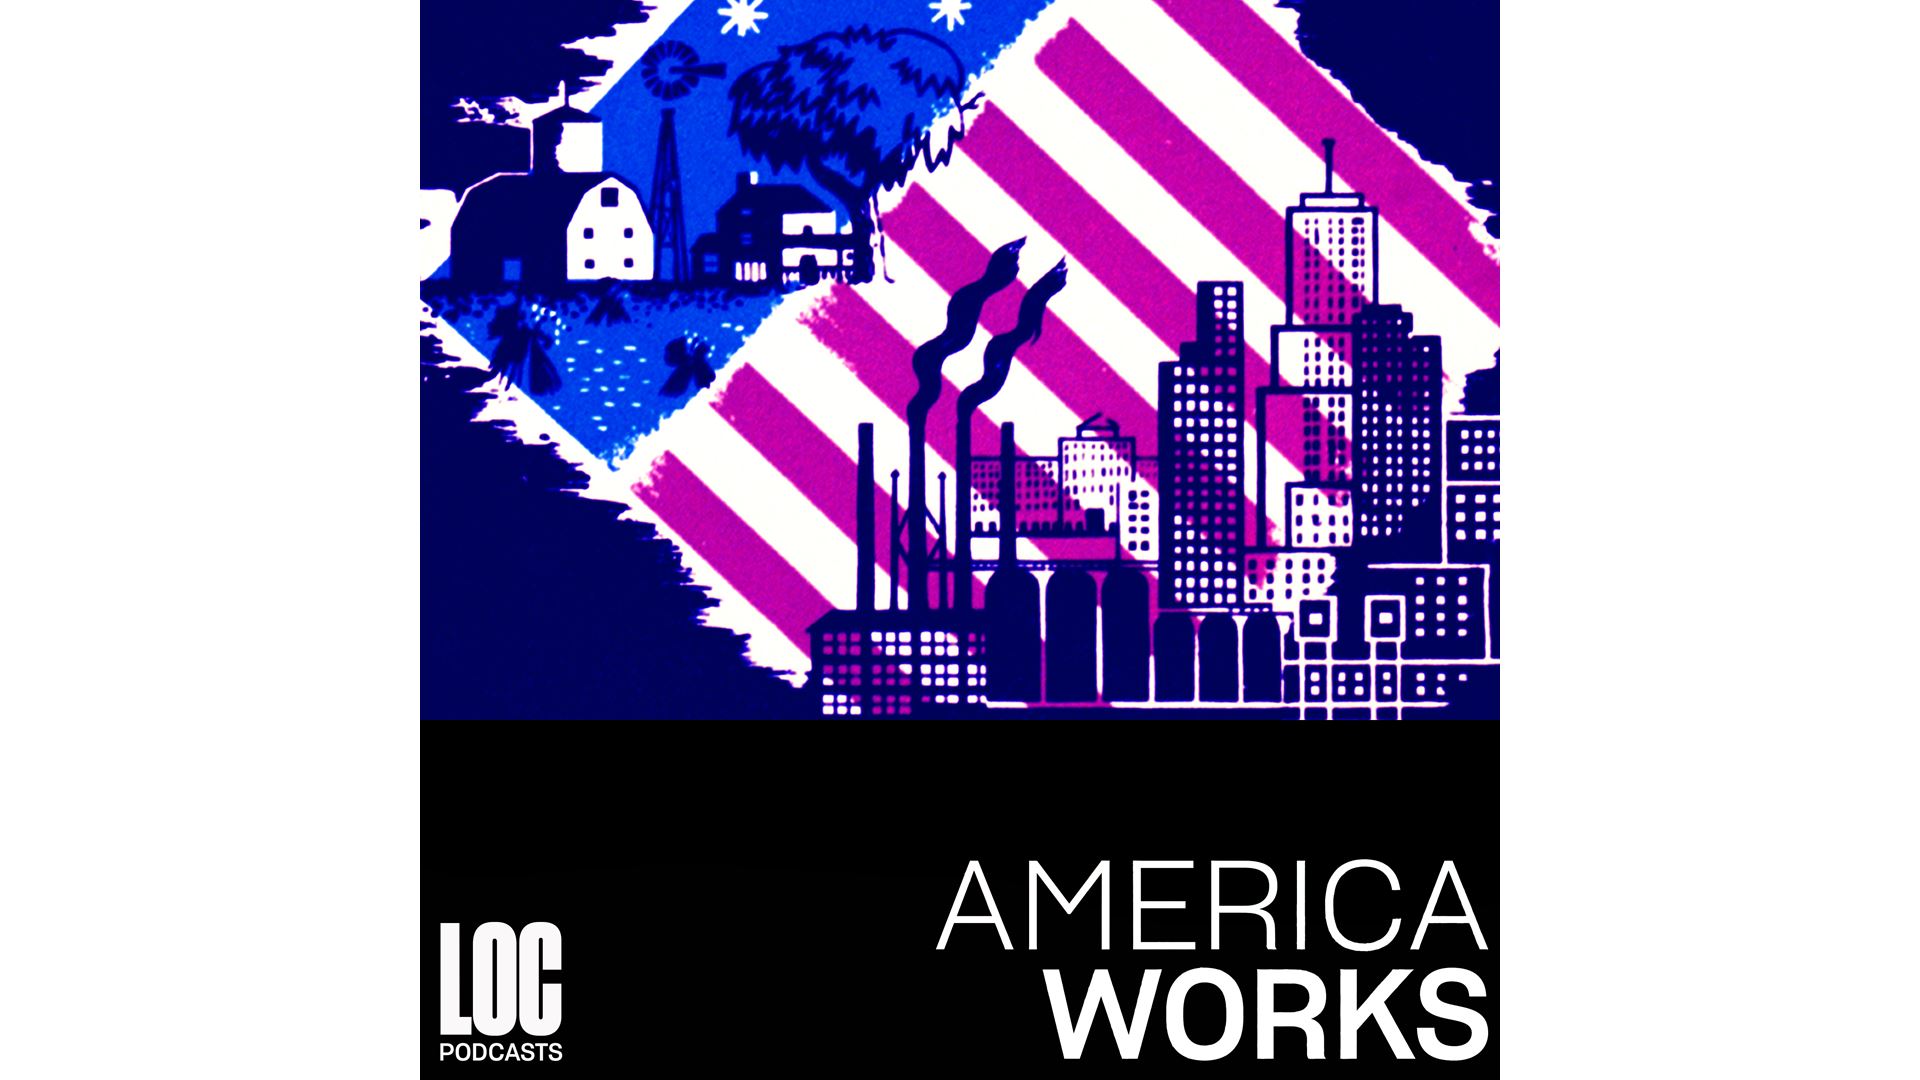 Library of Congress Rolls Out Third Season of ‘America Works’ Podcast